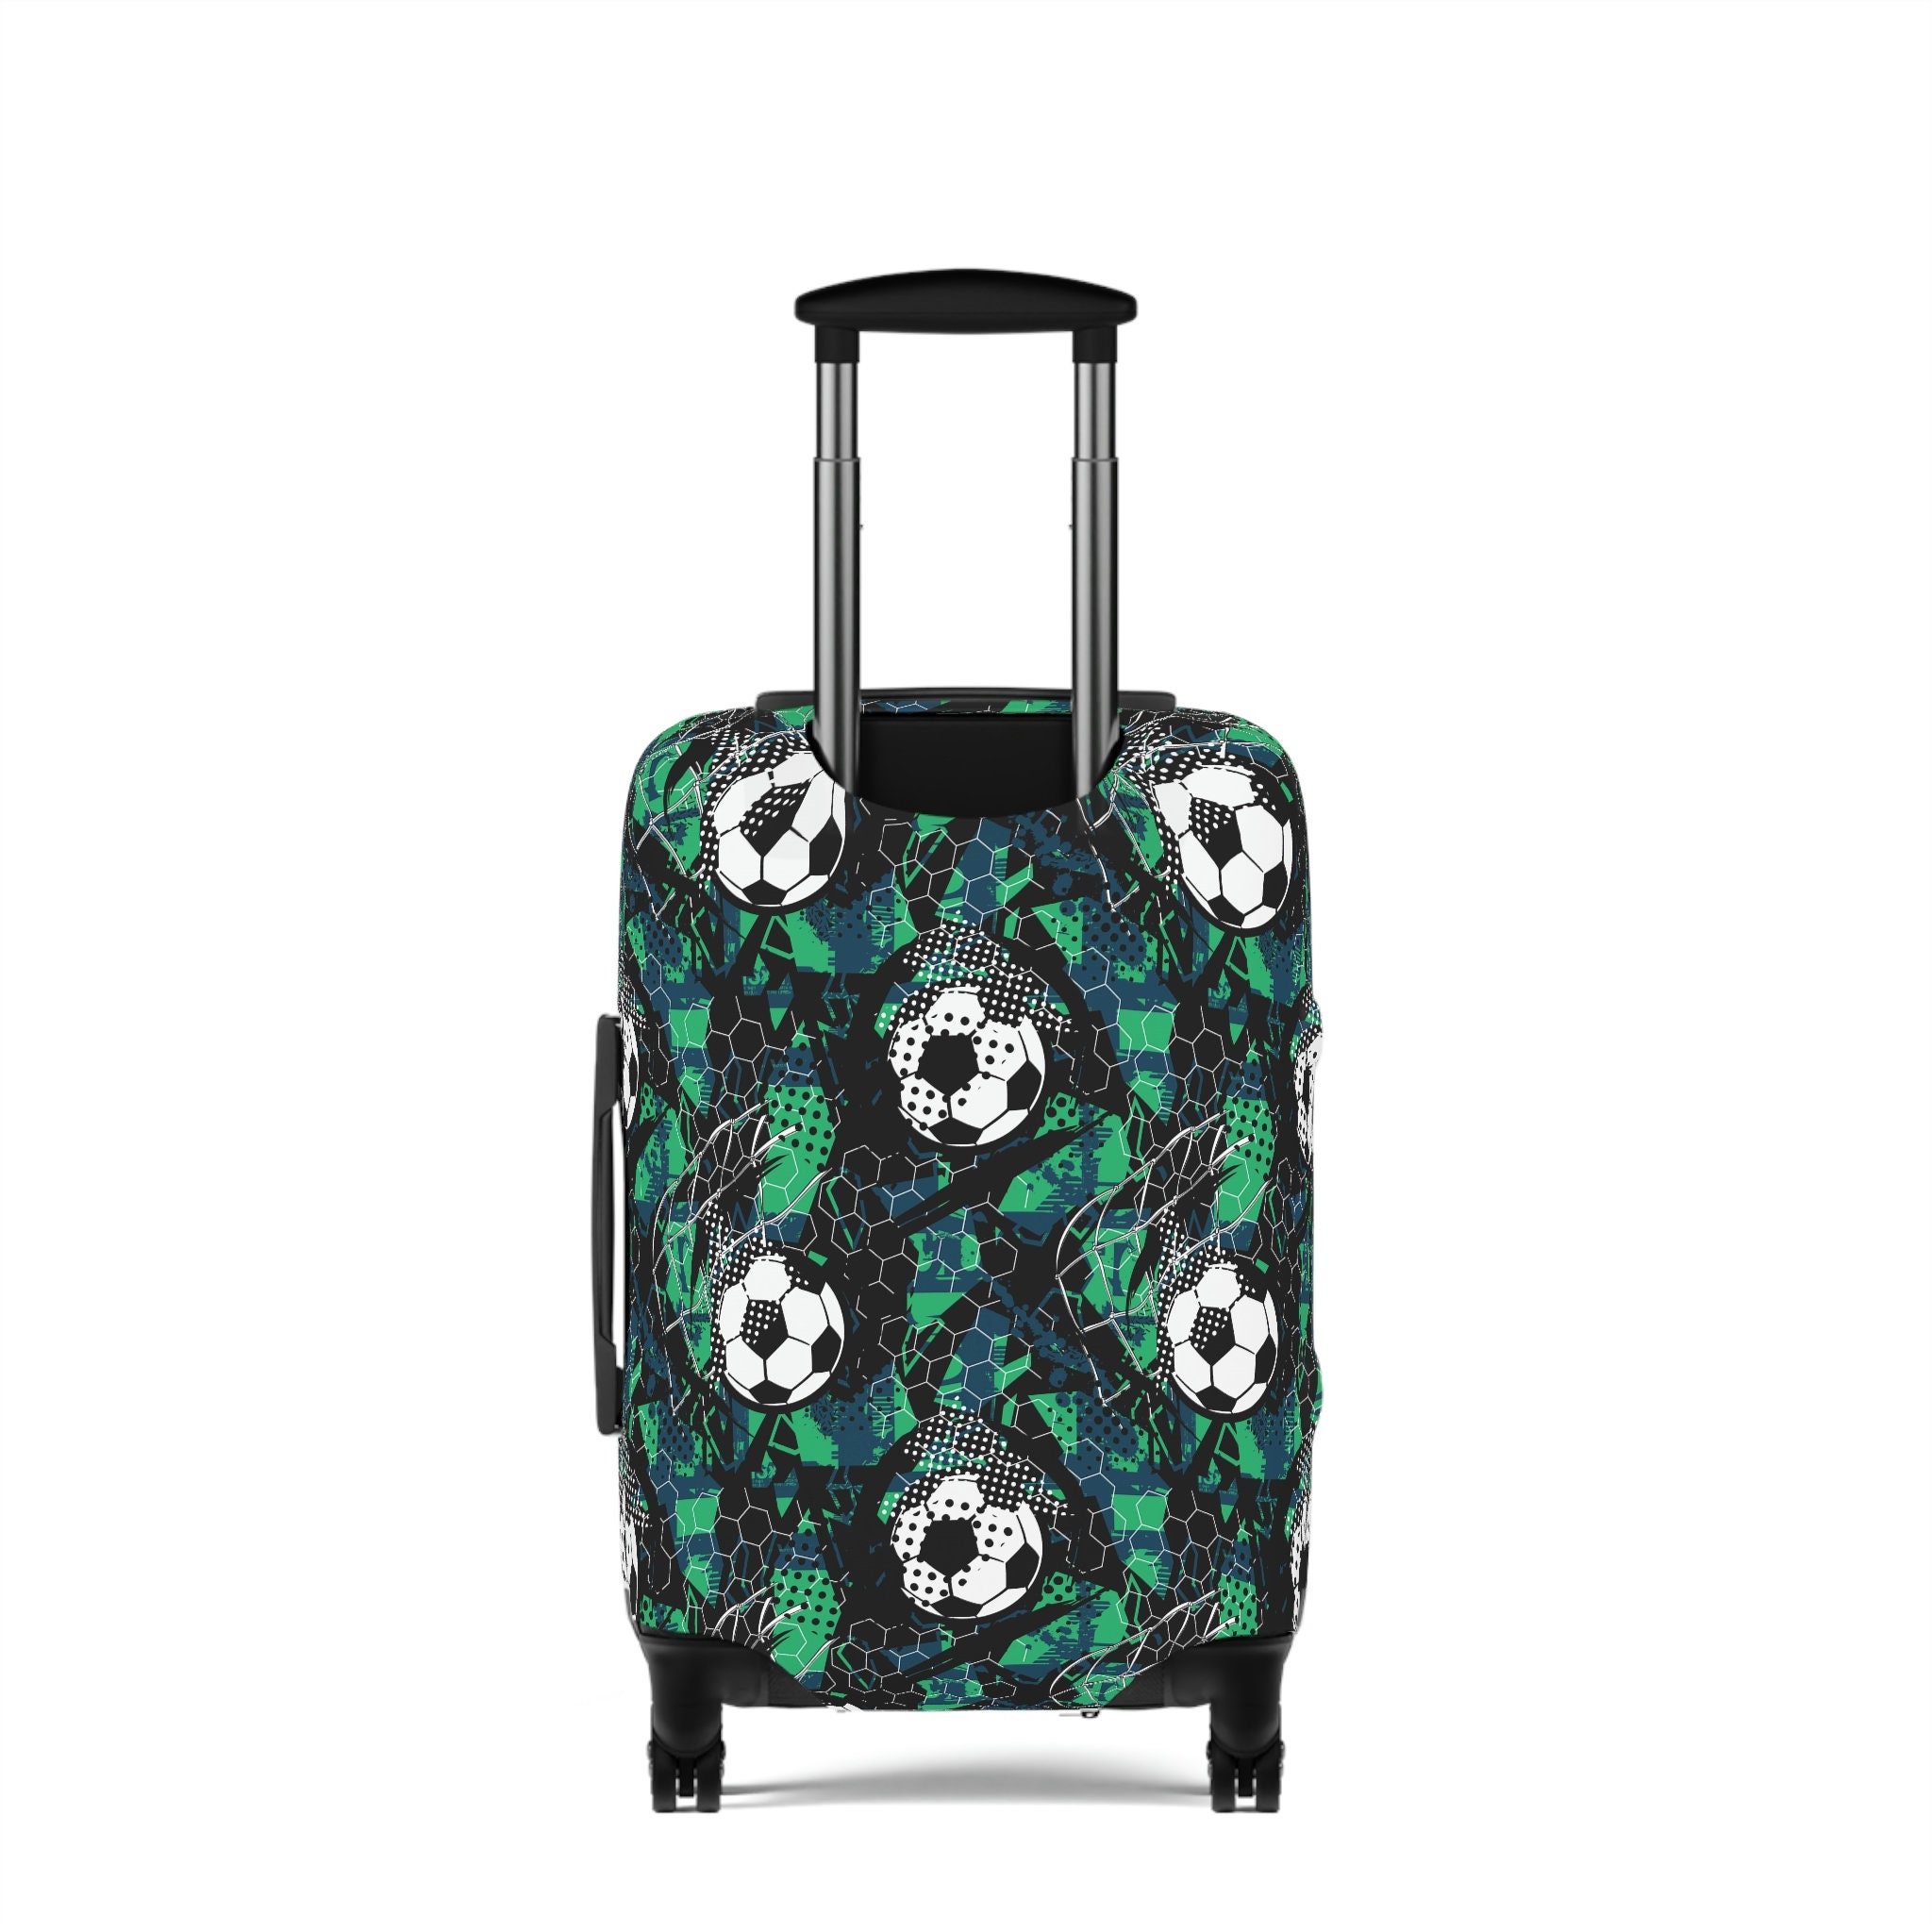 Football Luggage cover, Sport Luggage Cover